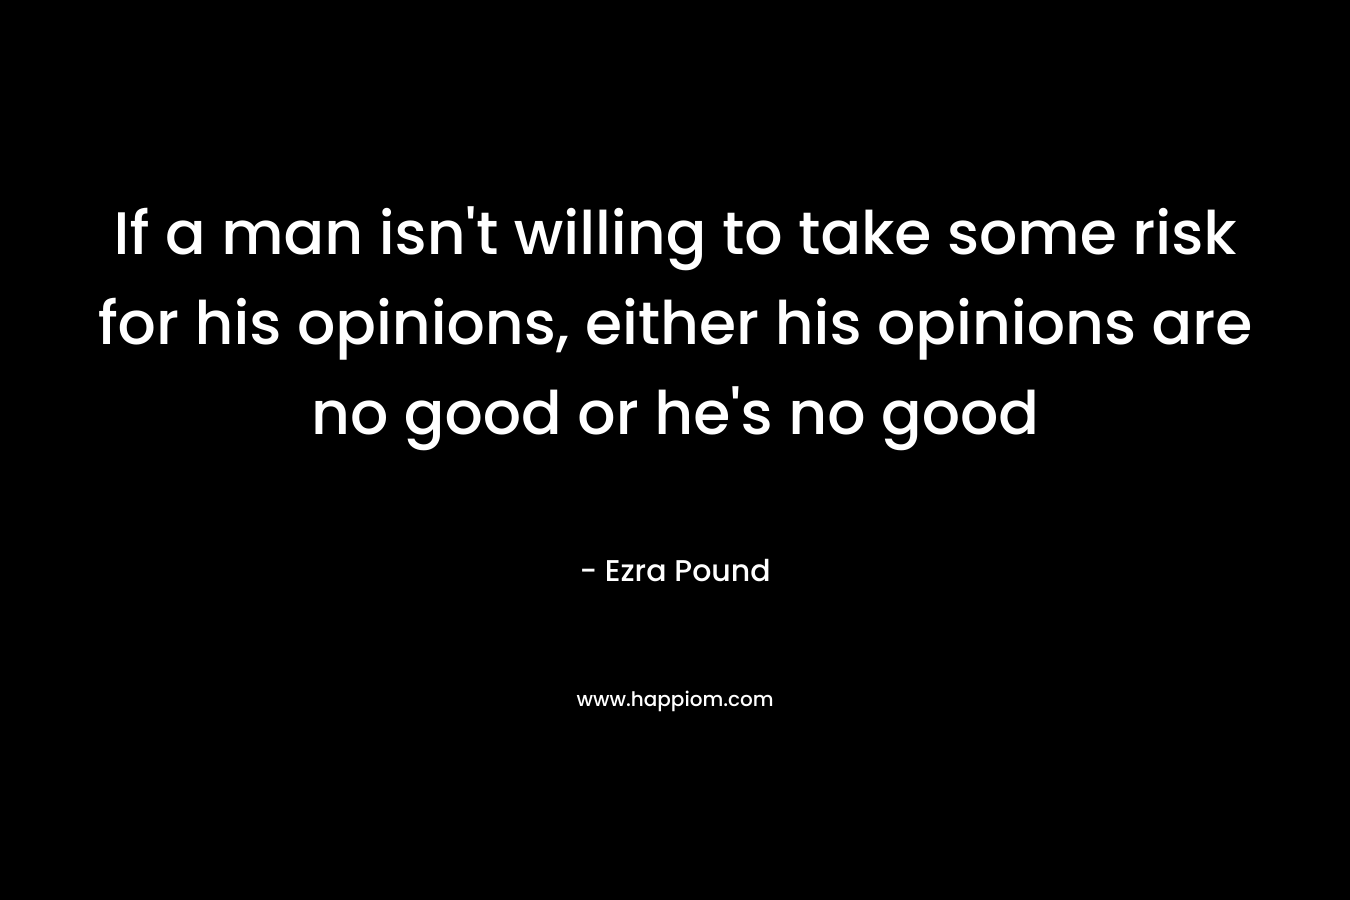 If a man isn't willing to take some risk for his opinions, either his opinions are no good or he's no good